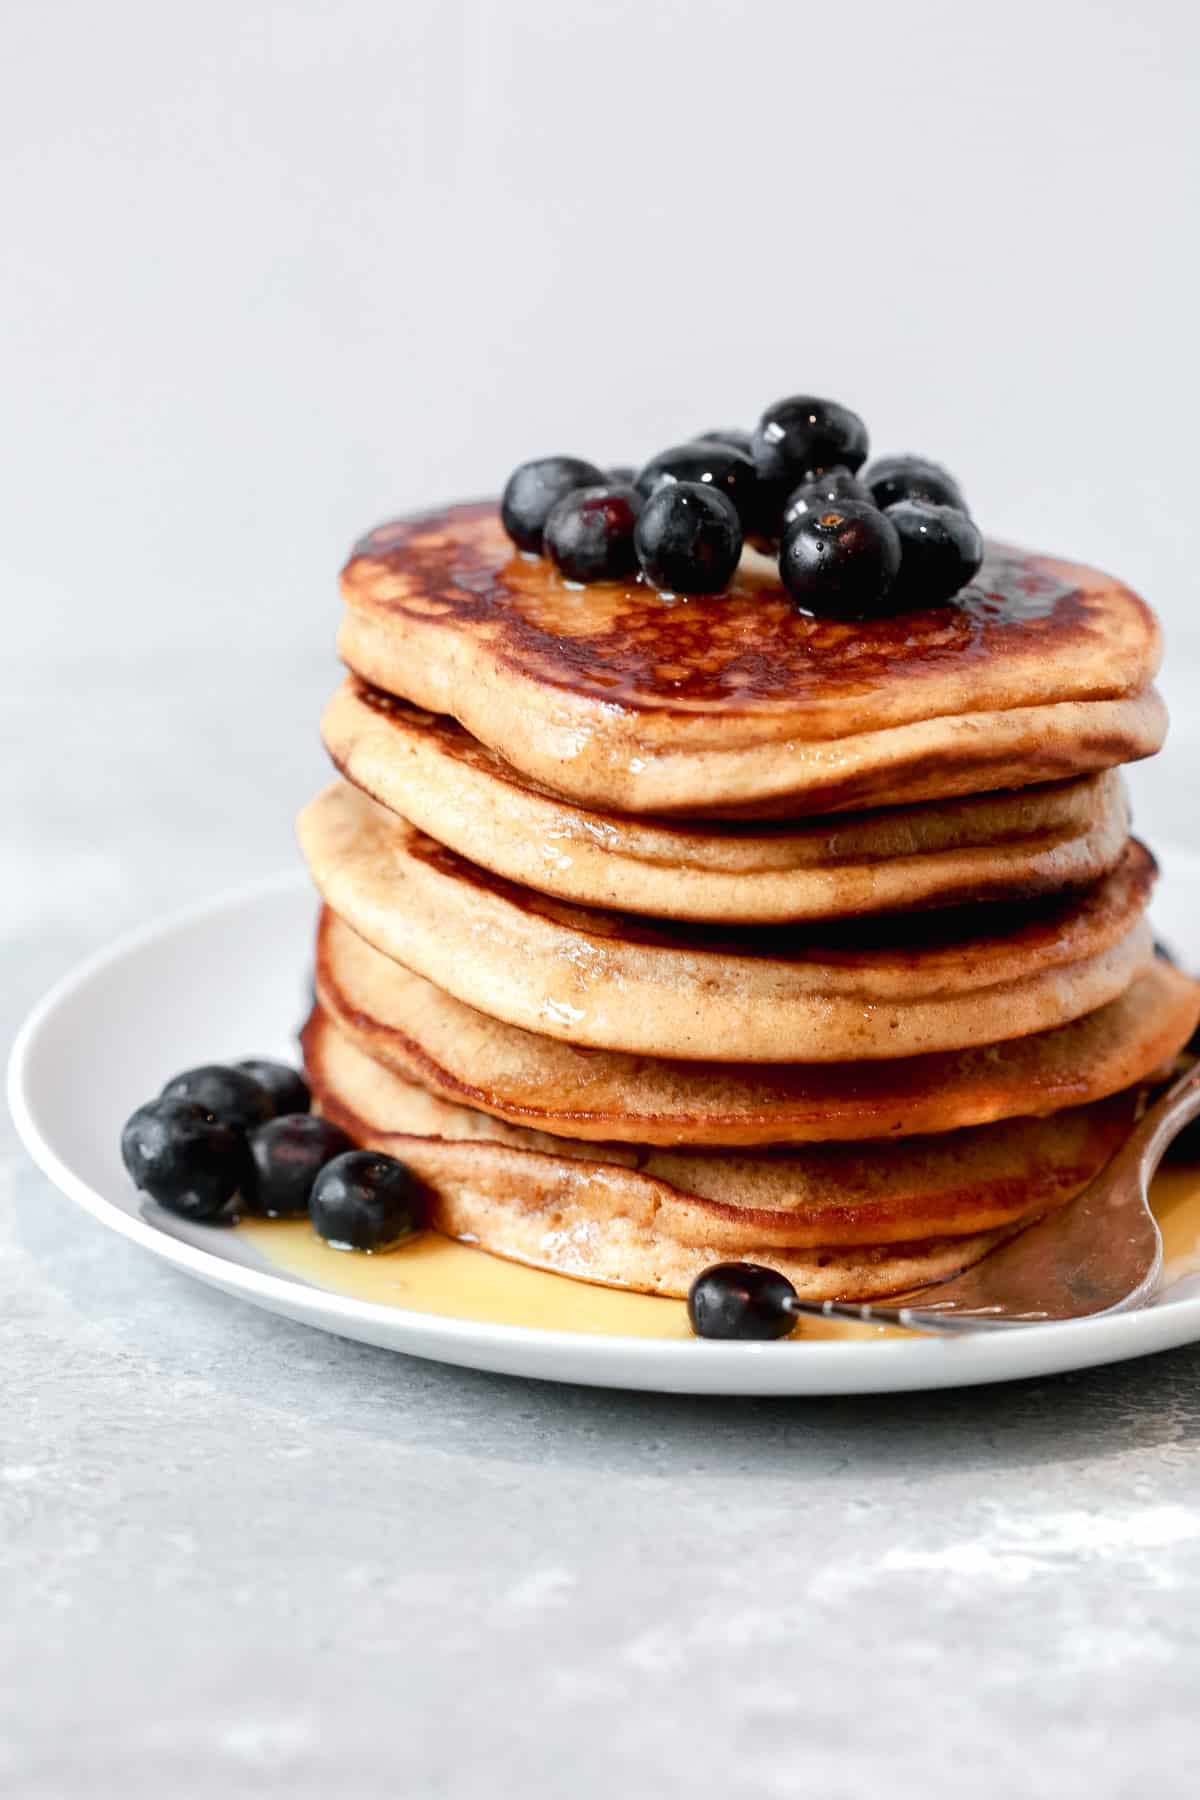 A stack of low carb almond flour pancakes with syrup and blueberries.